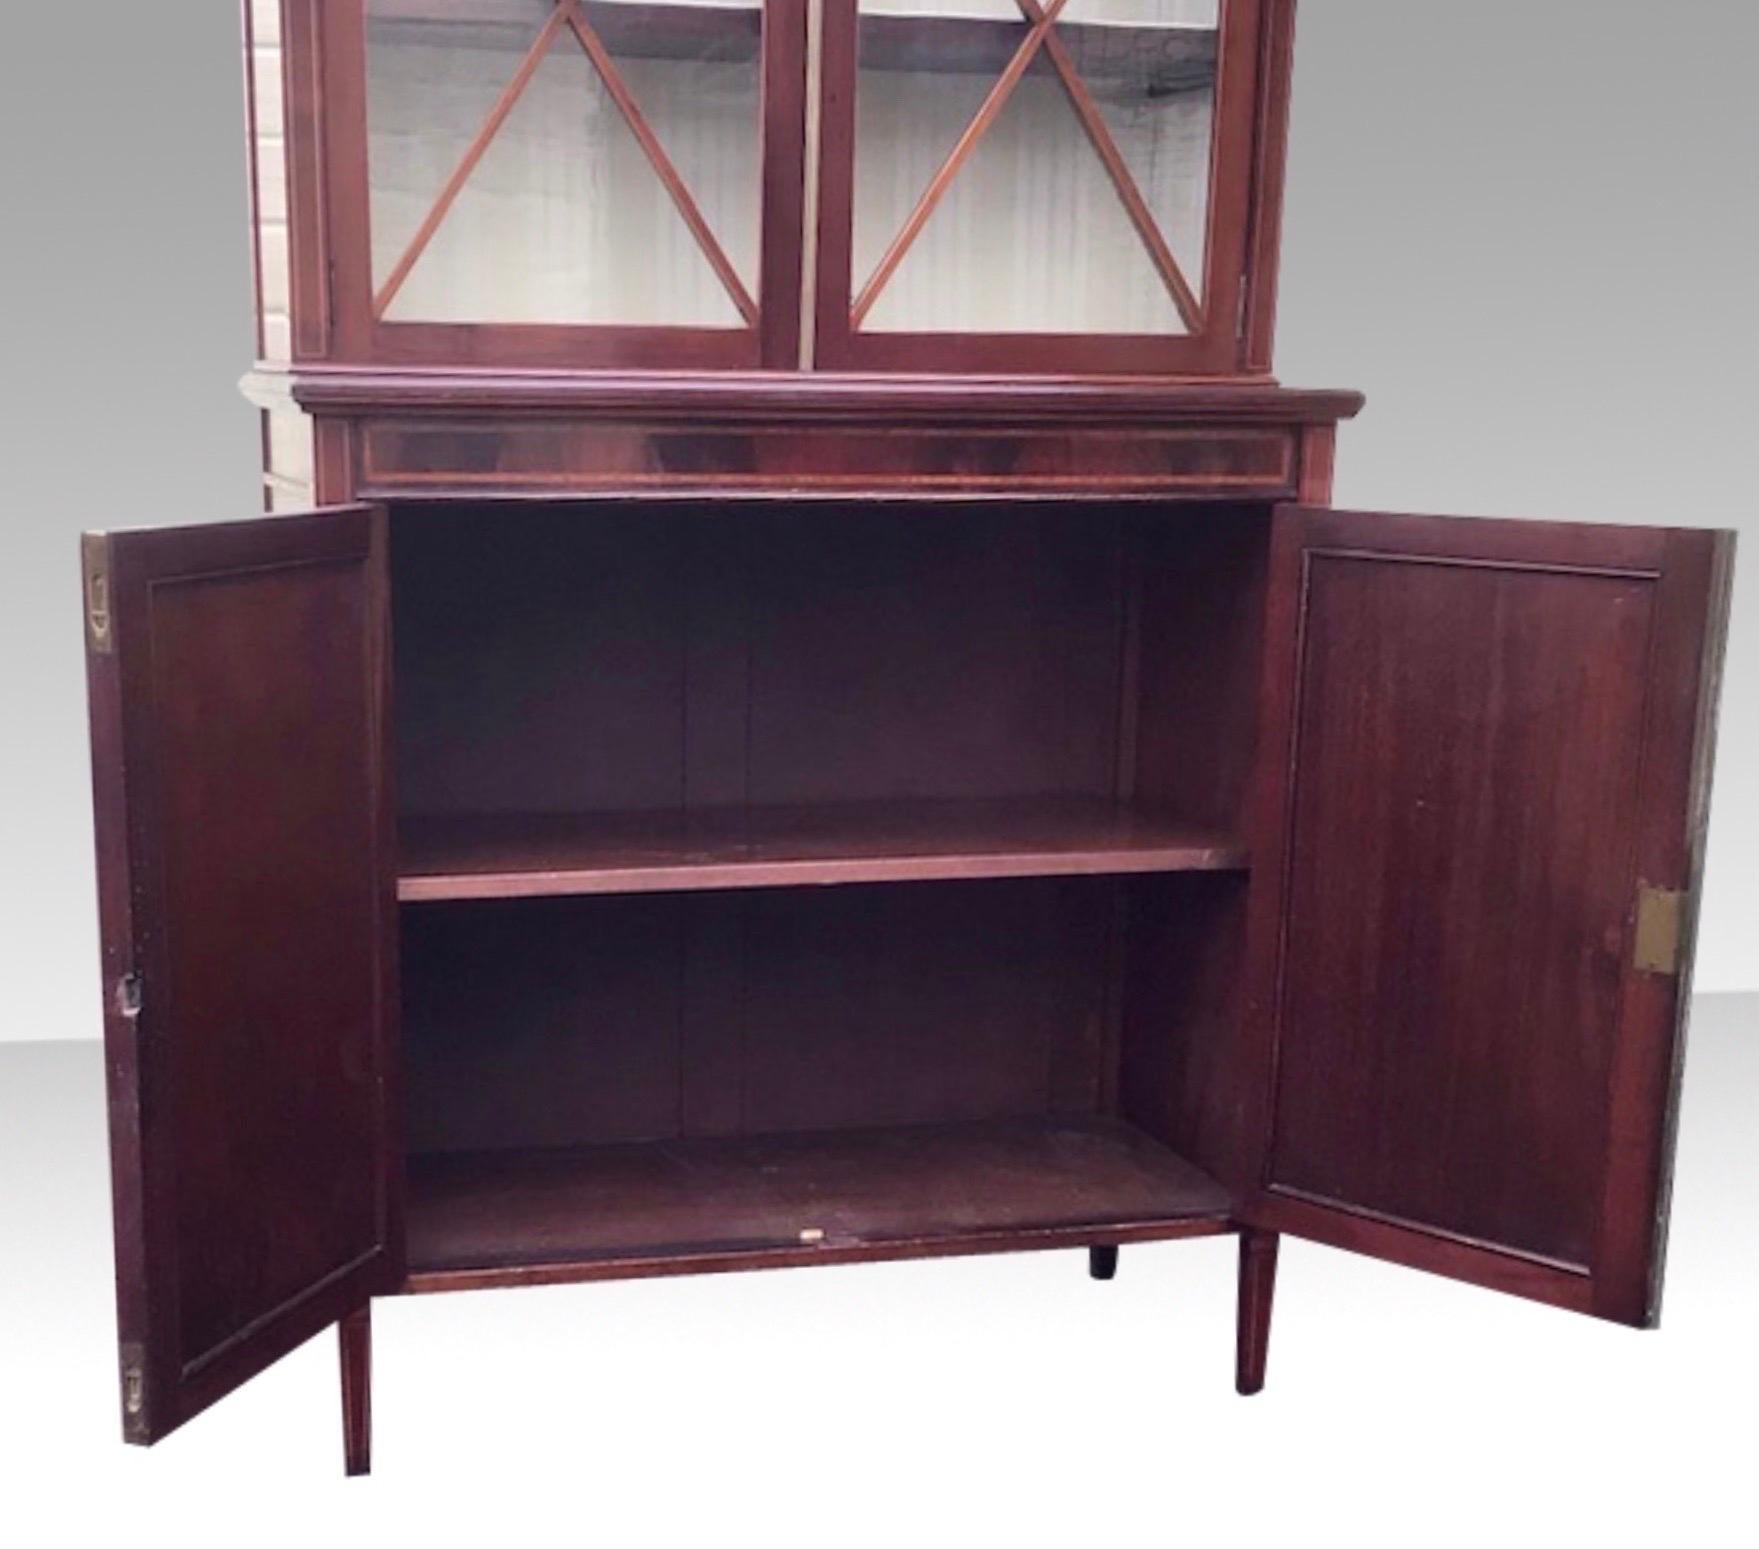 Antique Edwardian Inlaid Mahogany Narrow Cabinet, Bookcase For Sale 4